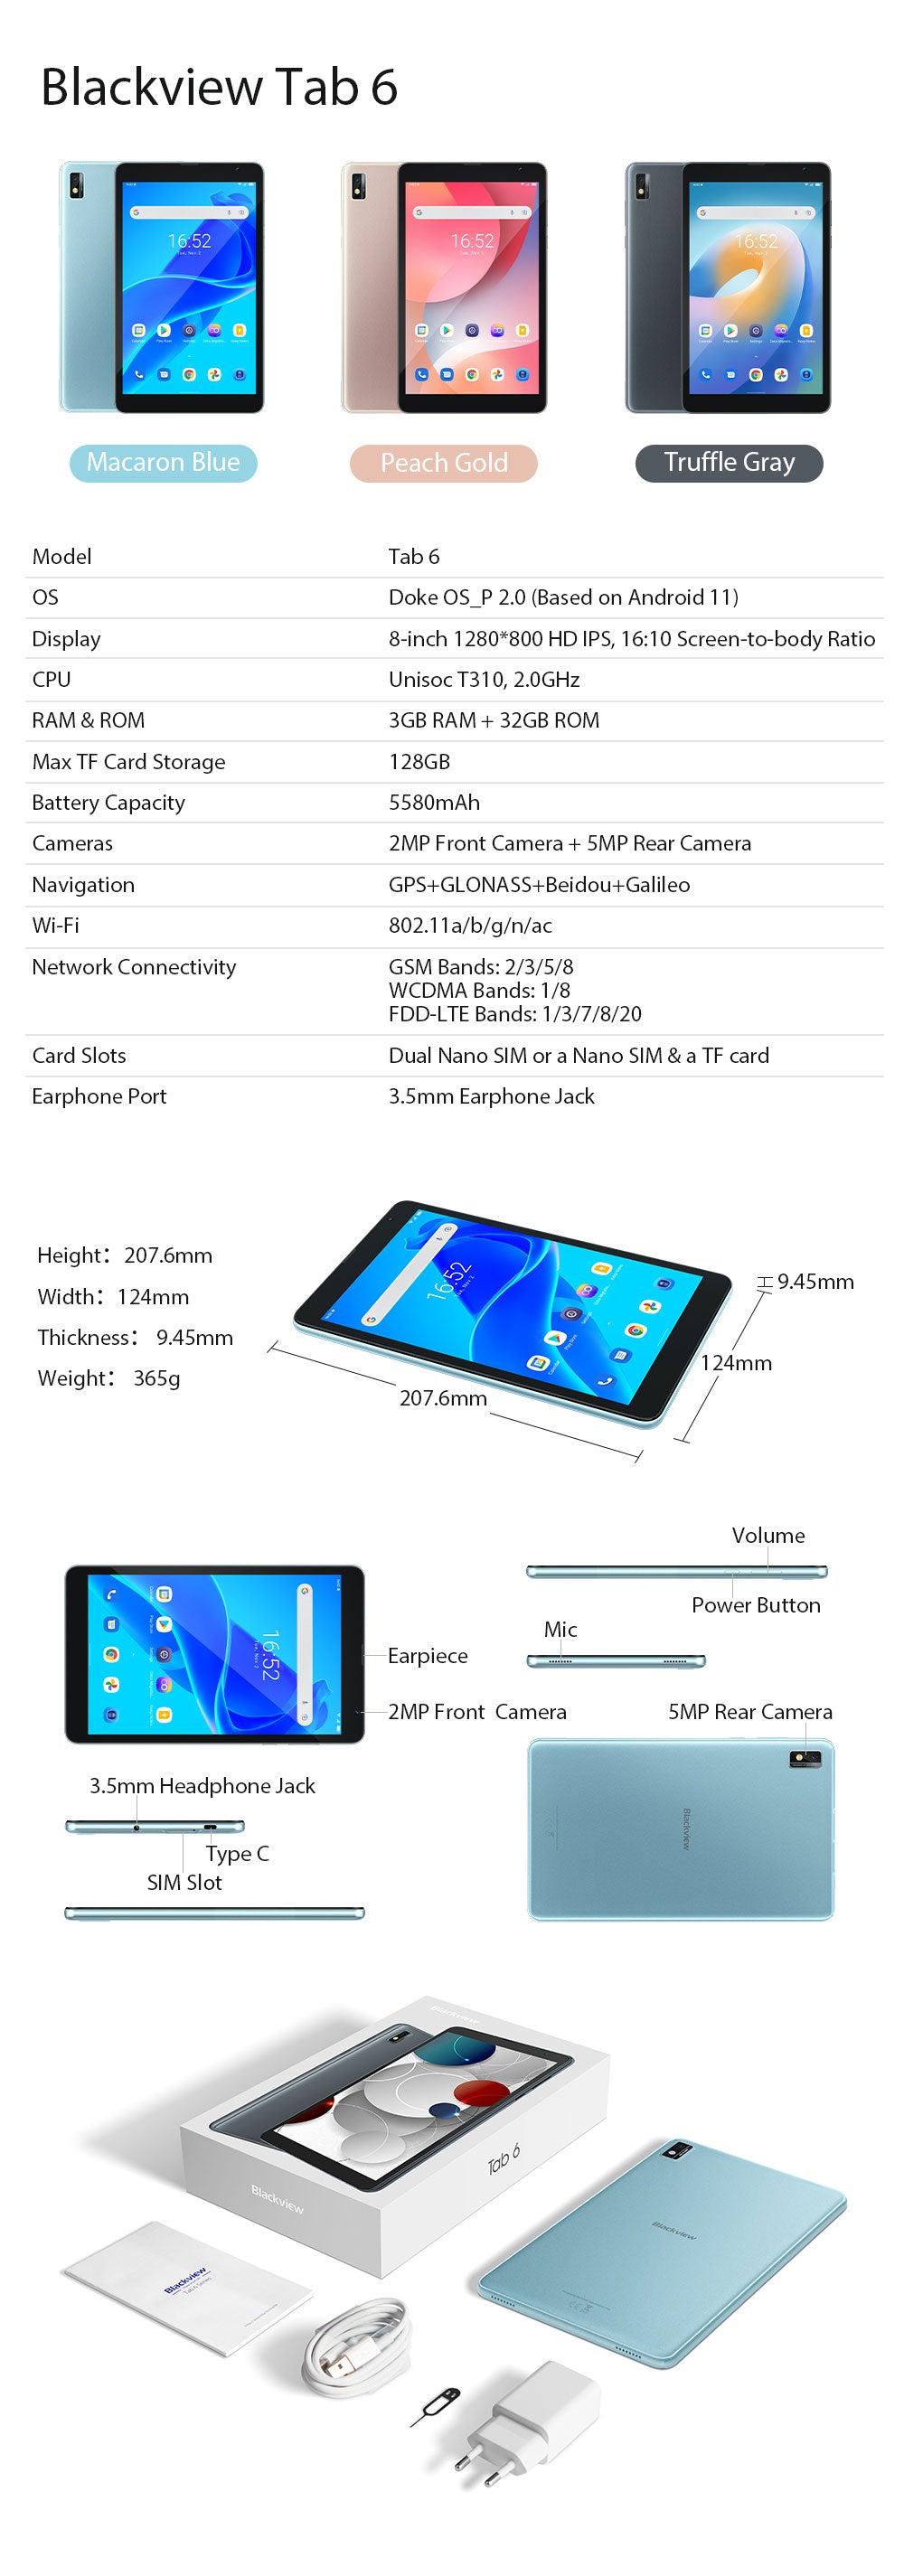 Blackview Tab 6 Specifications, User Reviews, Comparison